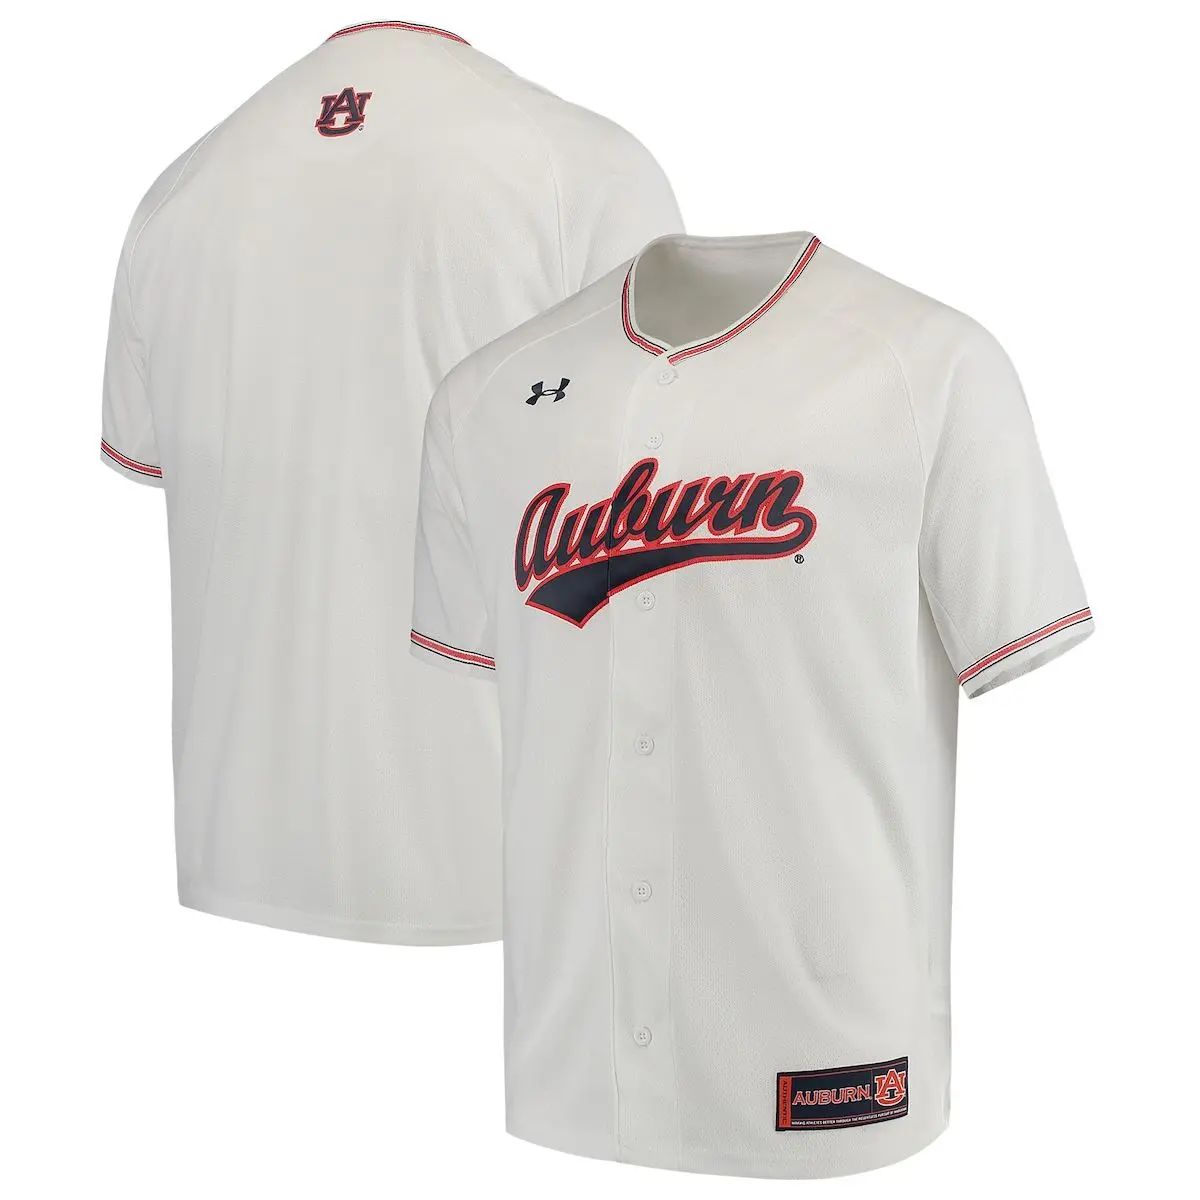 Men's Under Armour White Auburn Tigers Performance Replica Baseball Jersey at Nordstrom, Size Large | Nordstrom